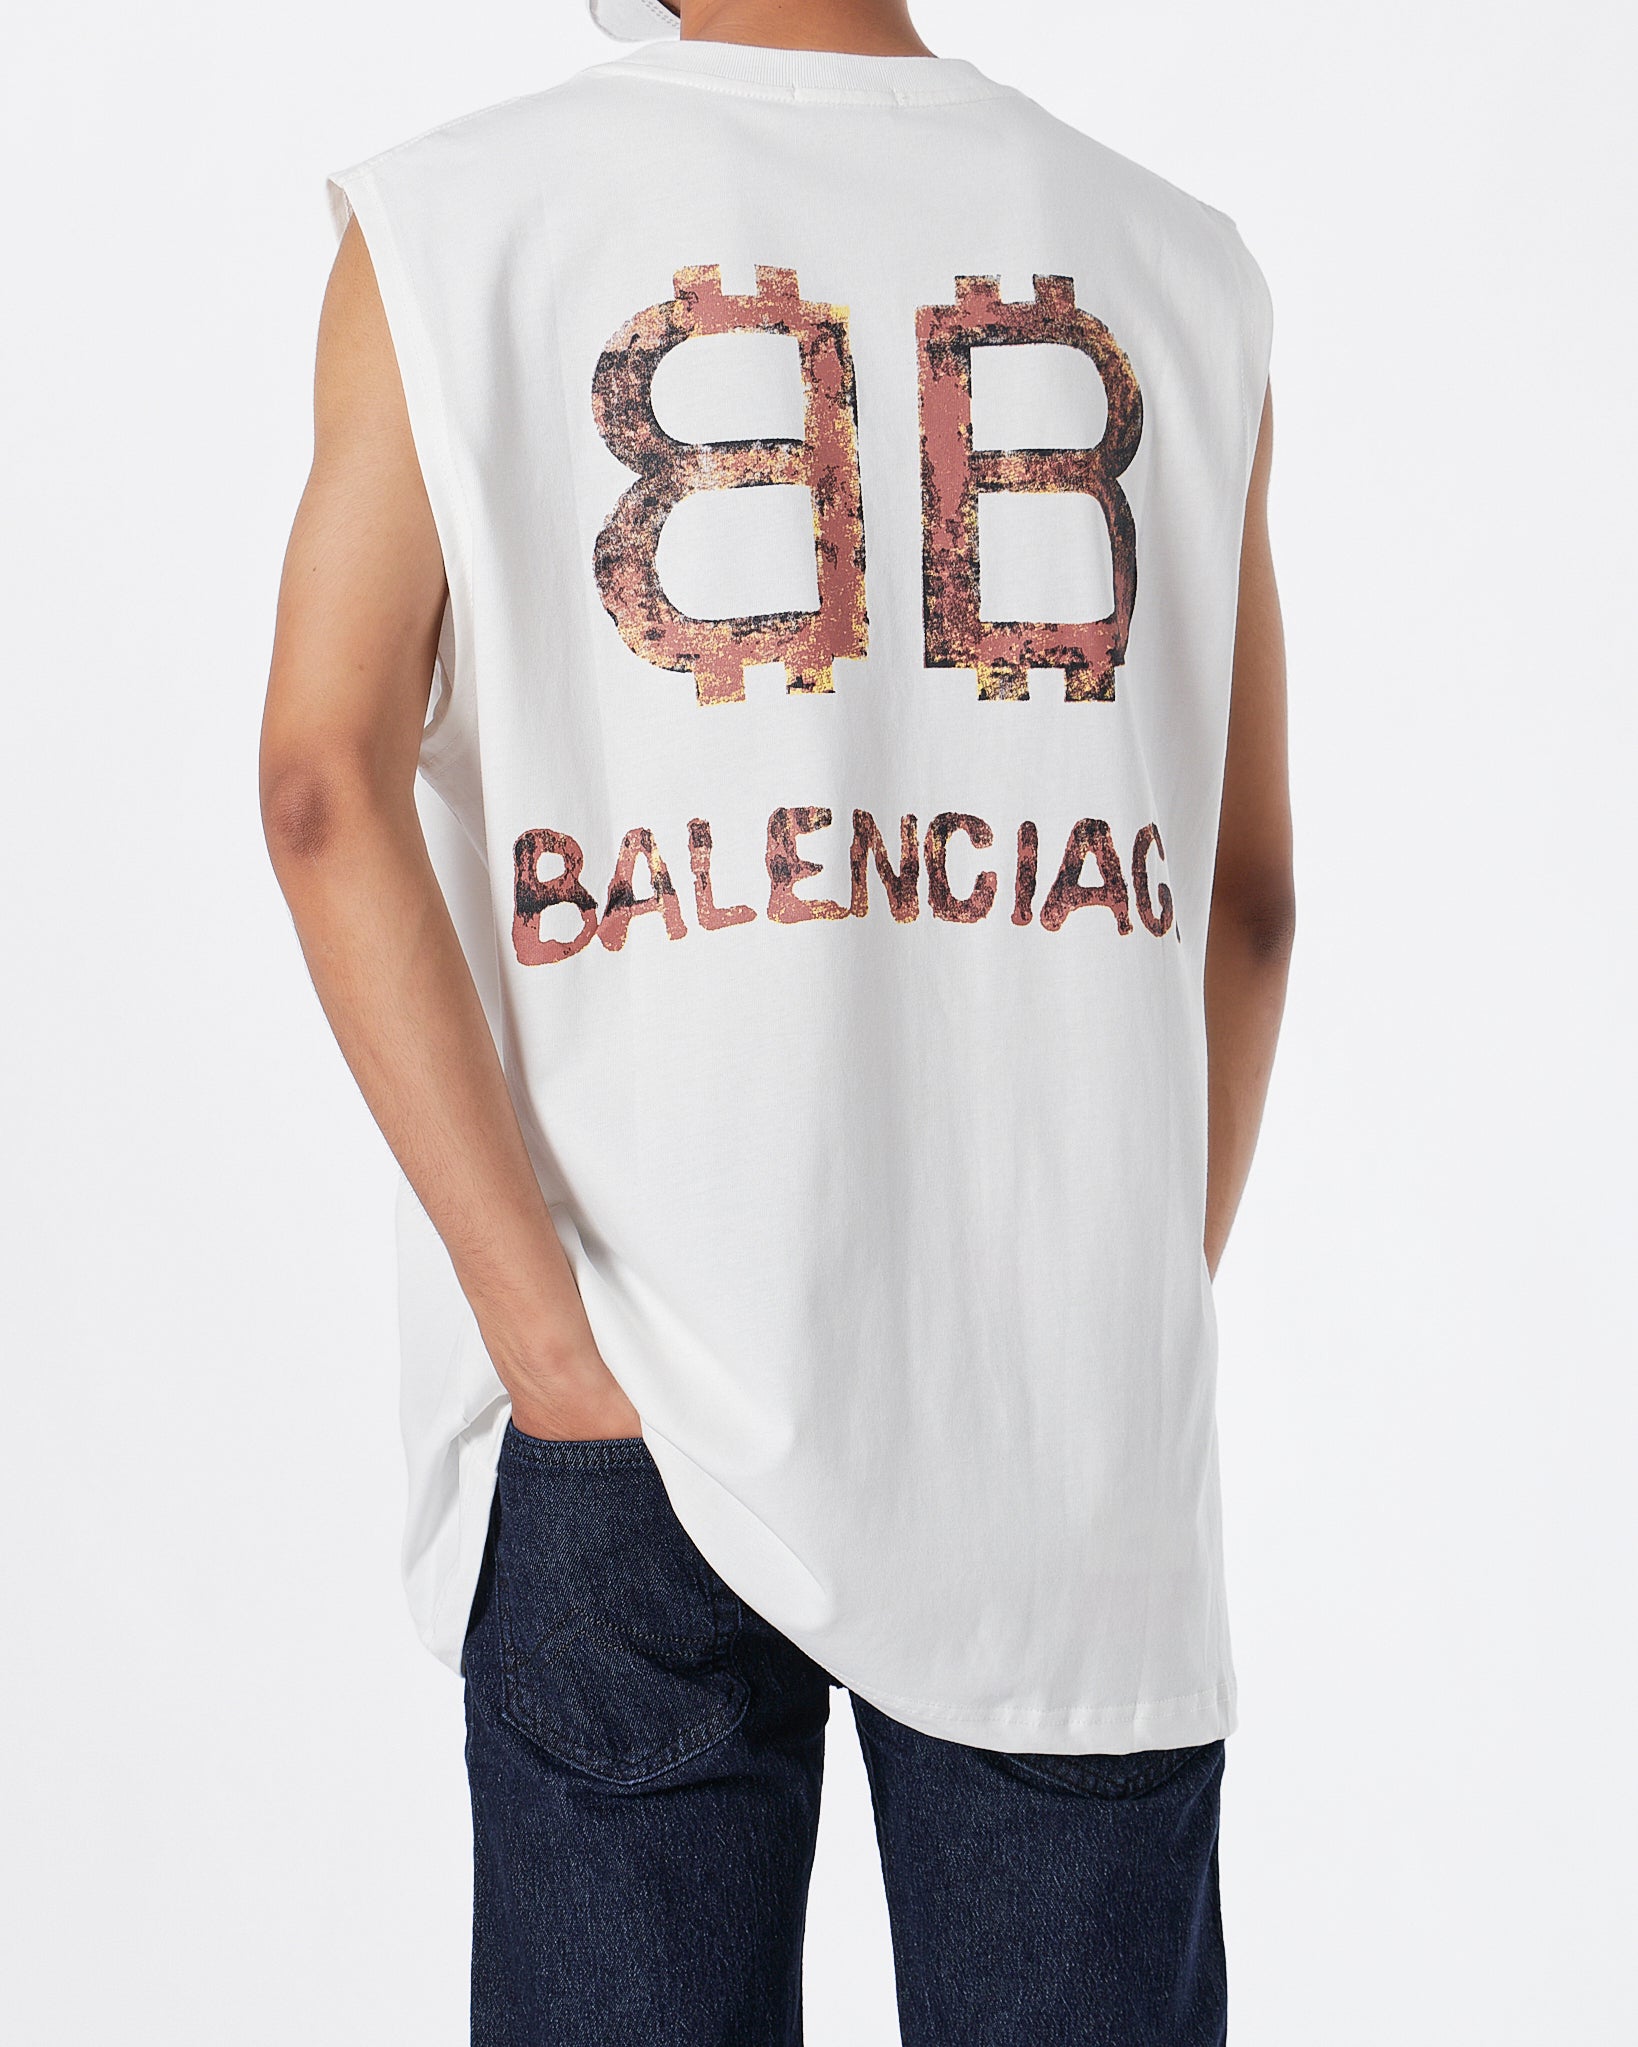 BAL Front and Back Printed Men White Tank Top 23.90